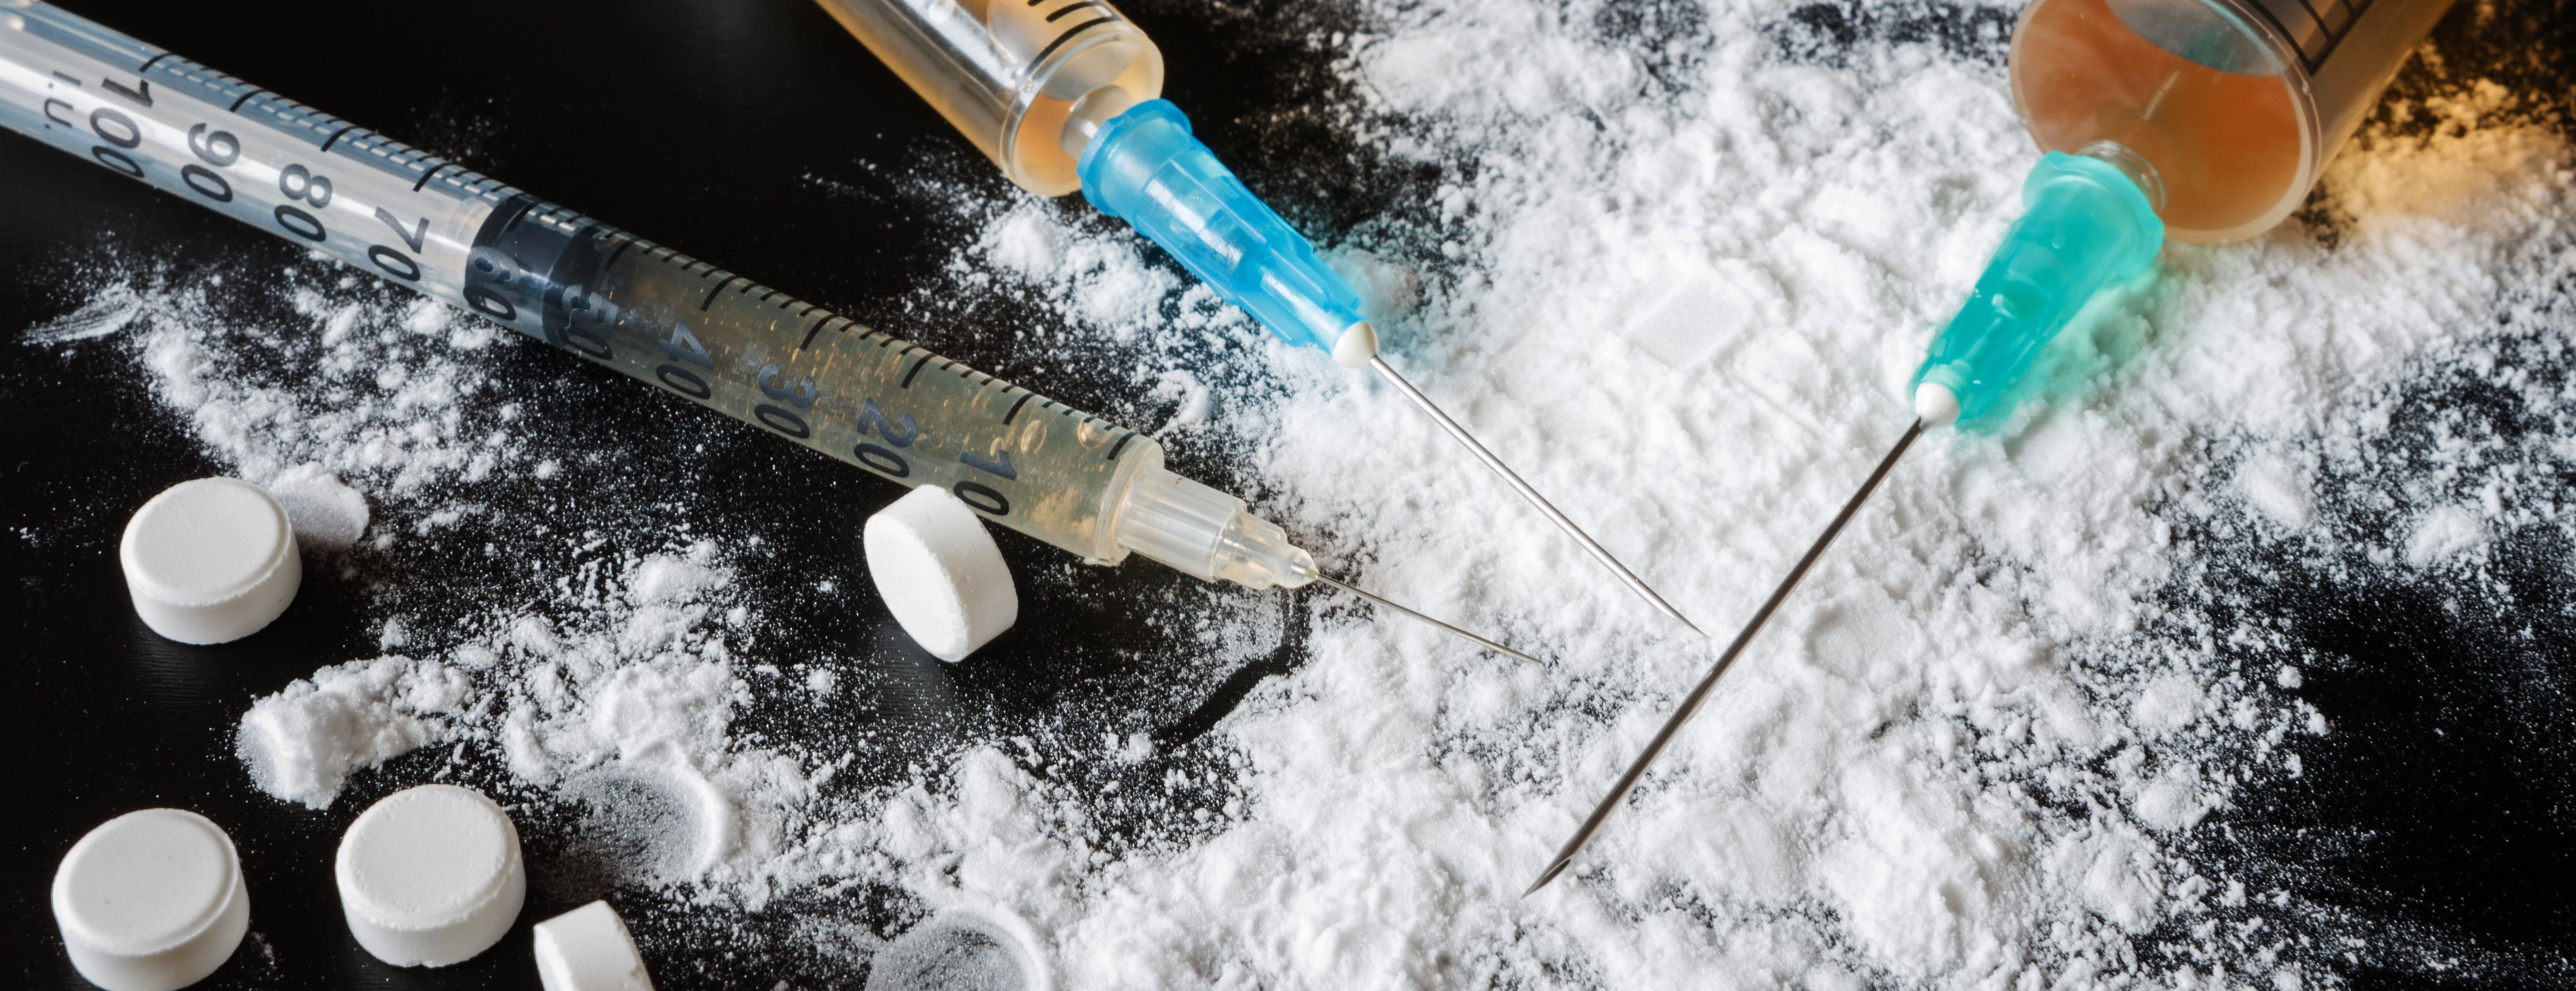 , Amphetamine: How it Ruins Health and Life When Abused